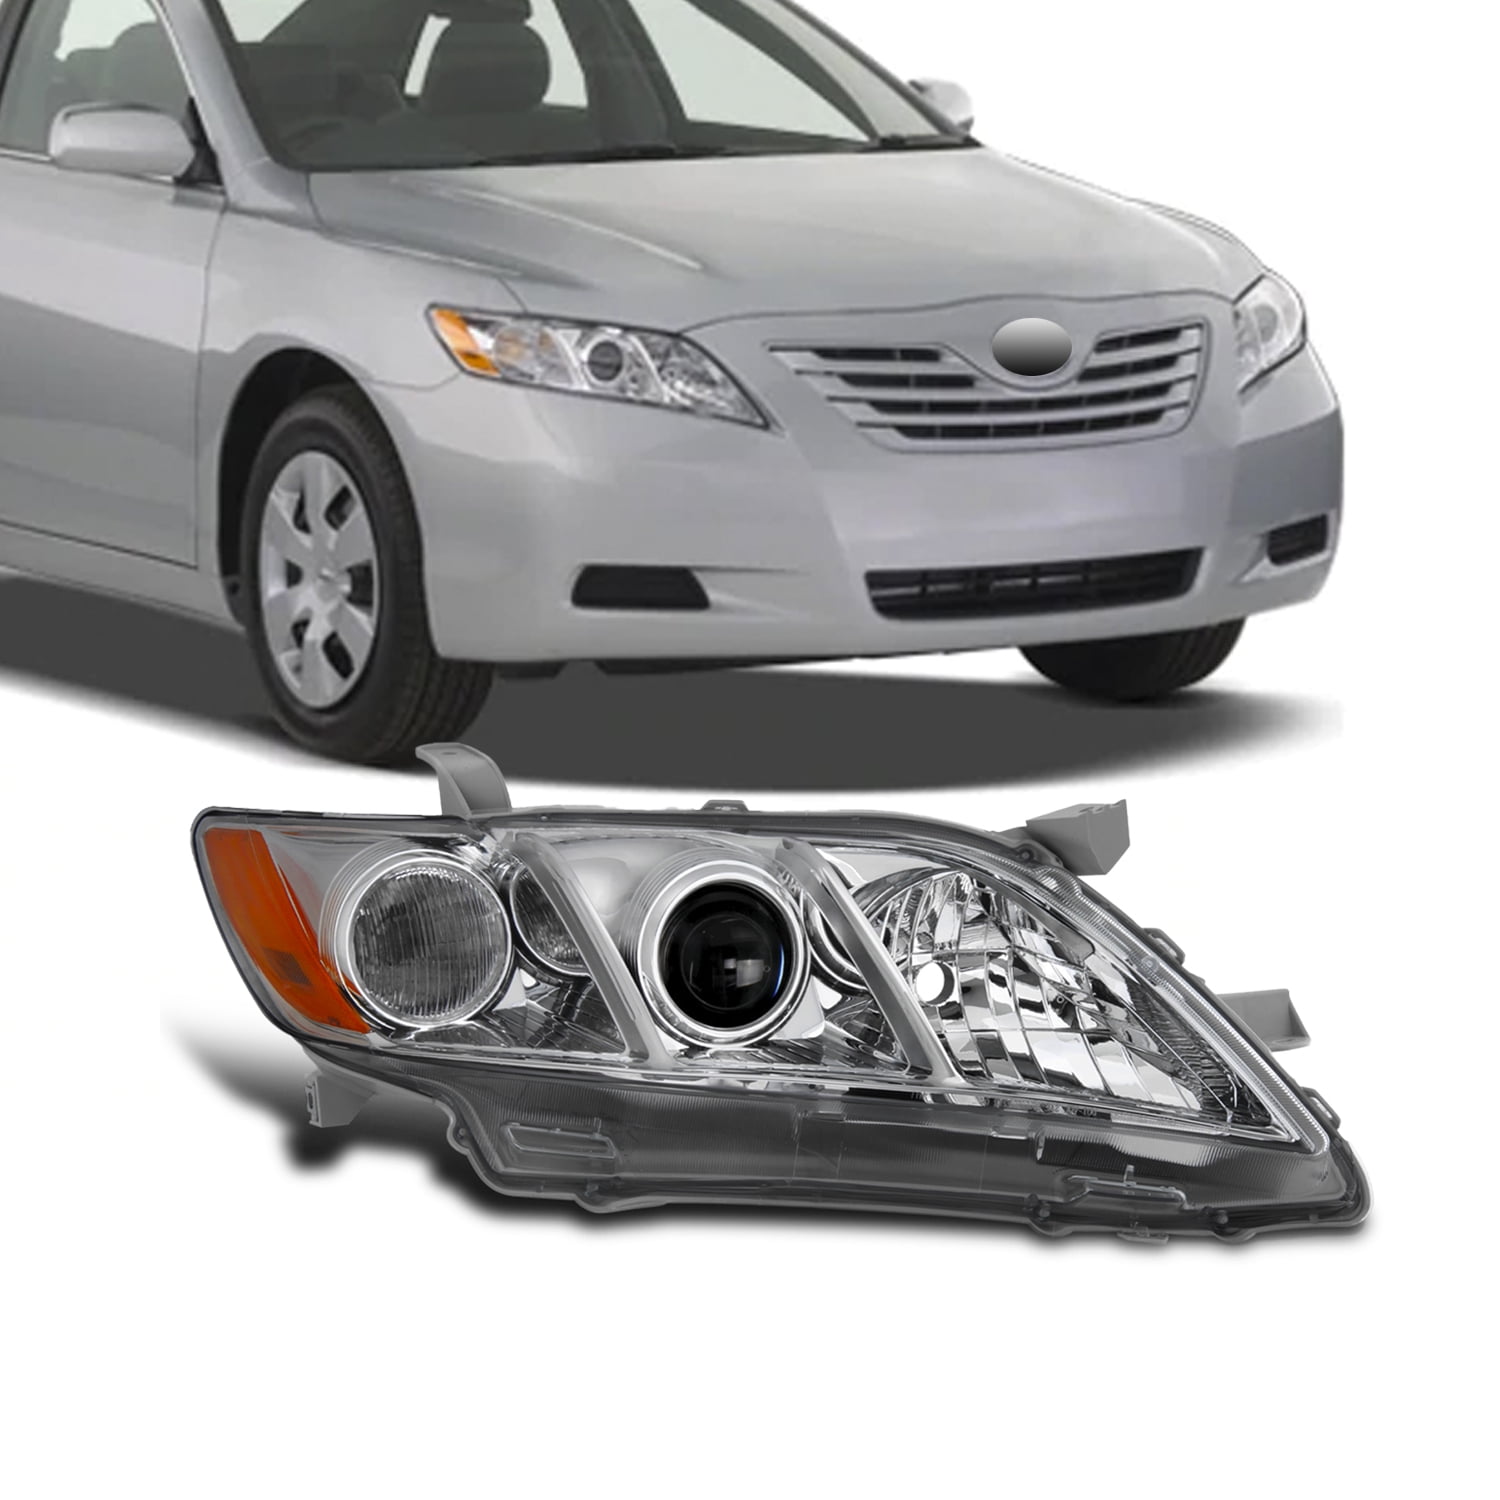 Headlights Headlamps Left & Right Pair Set for 07-09 Toyota Camry US Models 